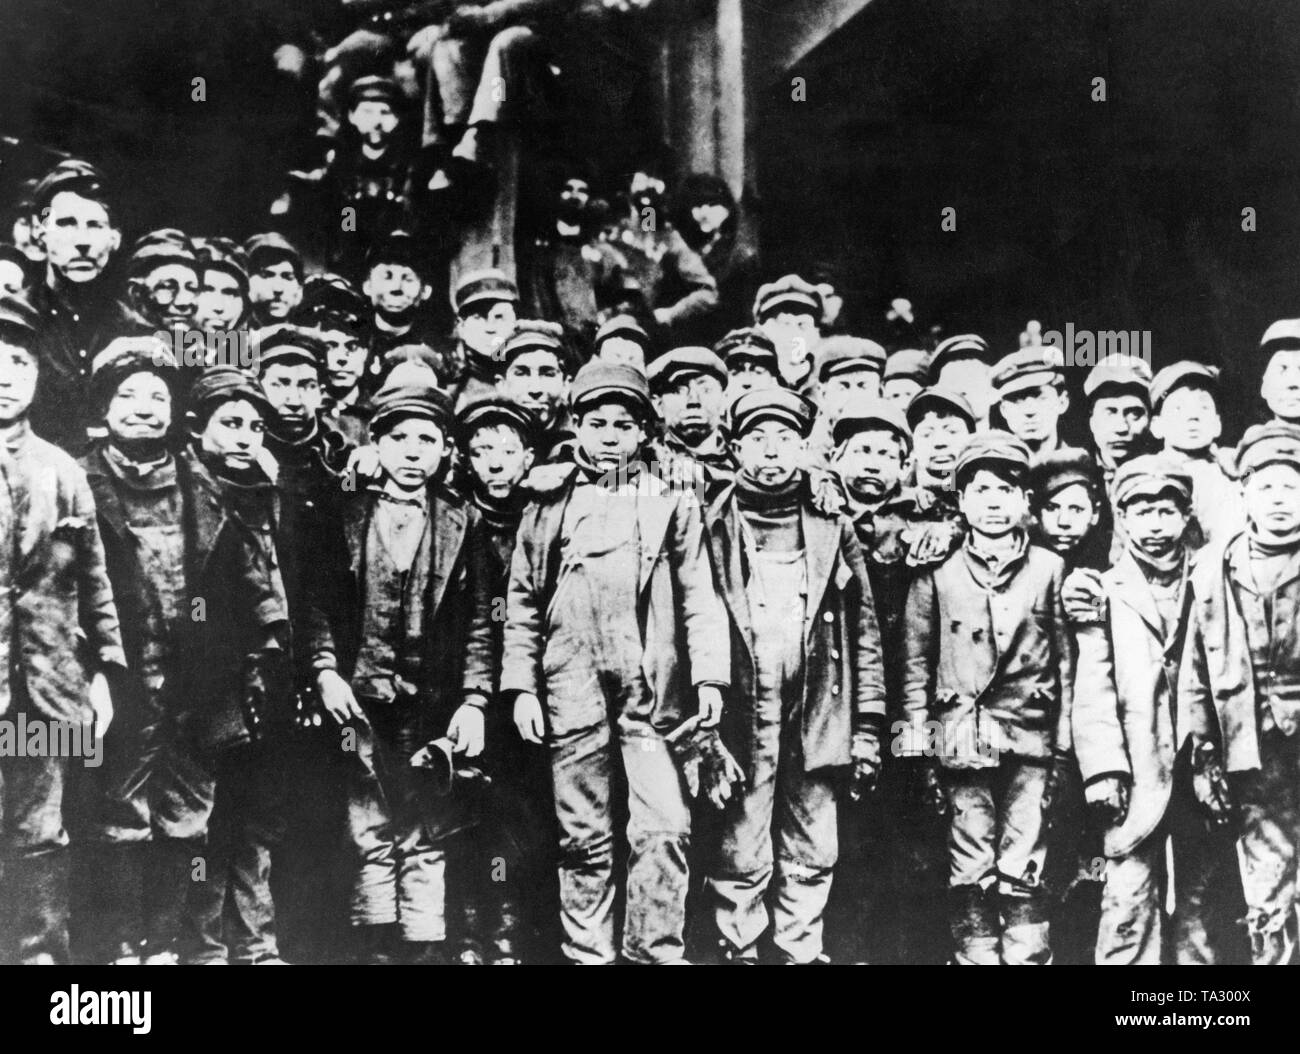 Child laborers in front of a coal mine in S. Pittstin, Pennsylvania. The photo was taken by photographer Lewis Wicker Hine on behalf of the National Child Labor Committee. Lewis Heine devoted his work to child labor in the USA and Europe. Between 1908 and 1921 about 5,000 photos were taken. Lewis considered himself as a social documentary photographer. Stock Photo